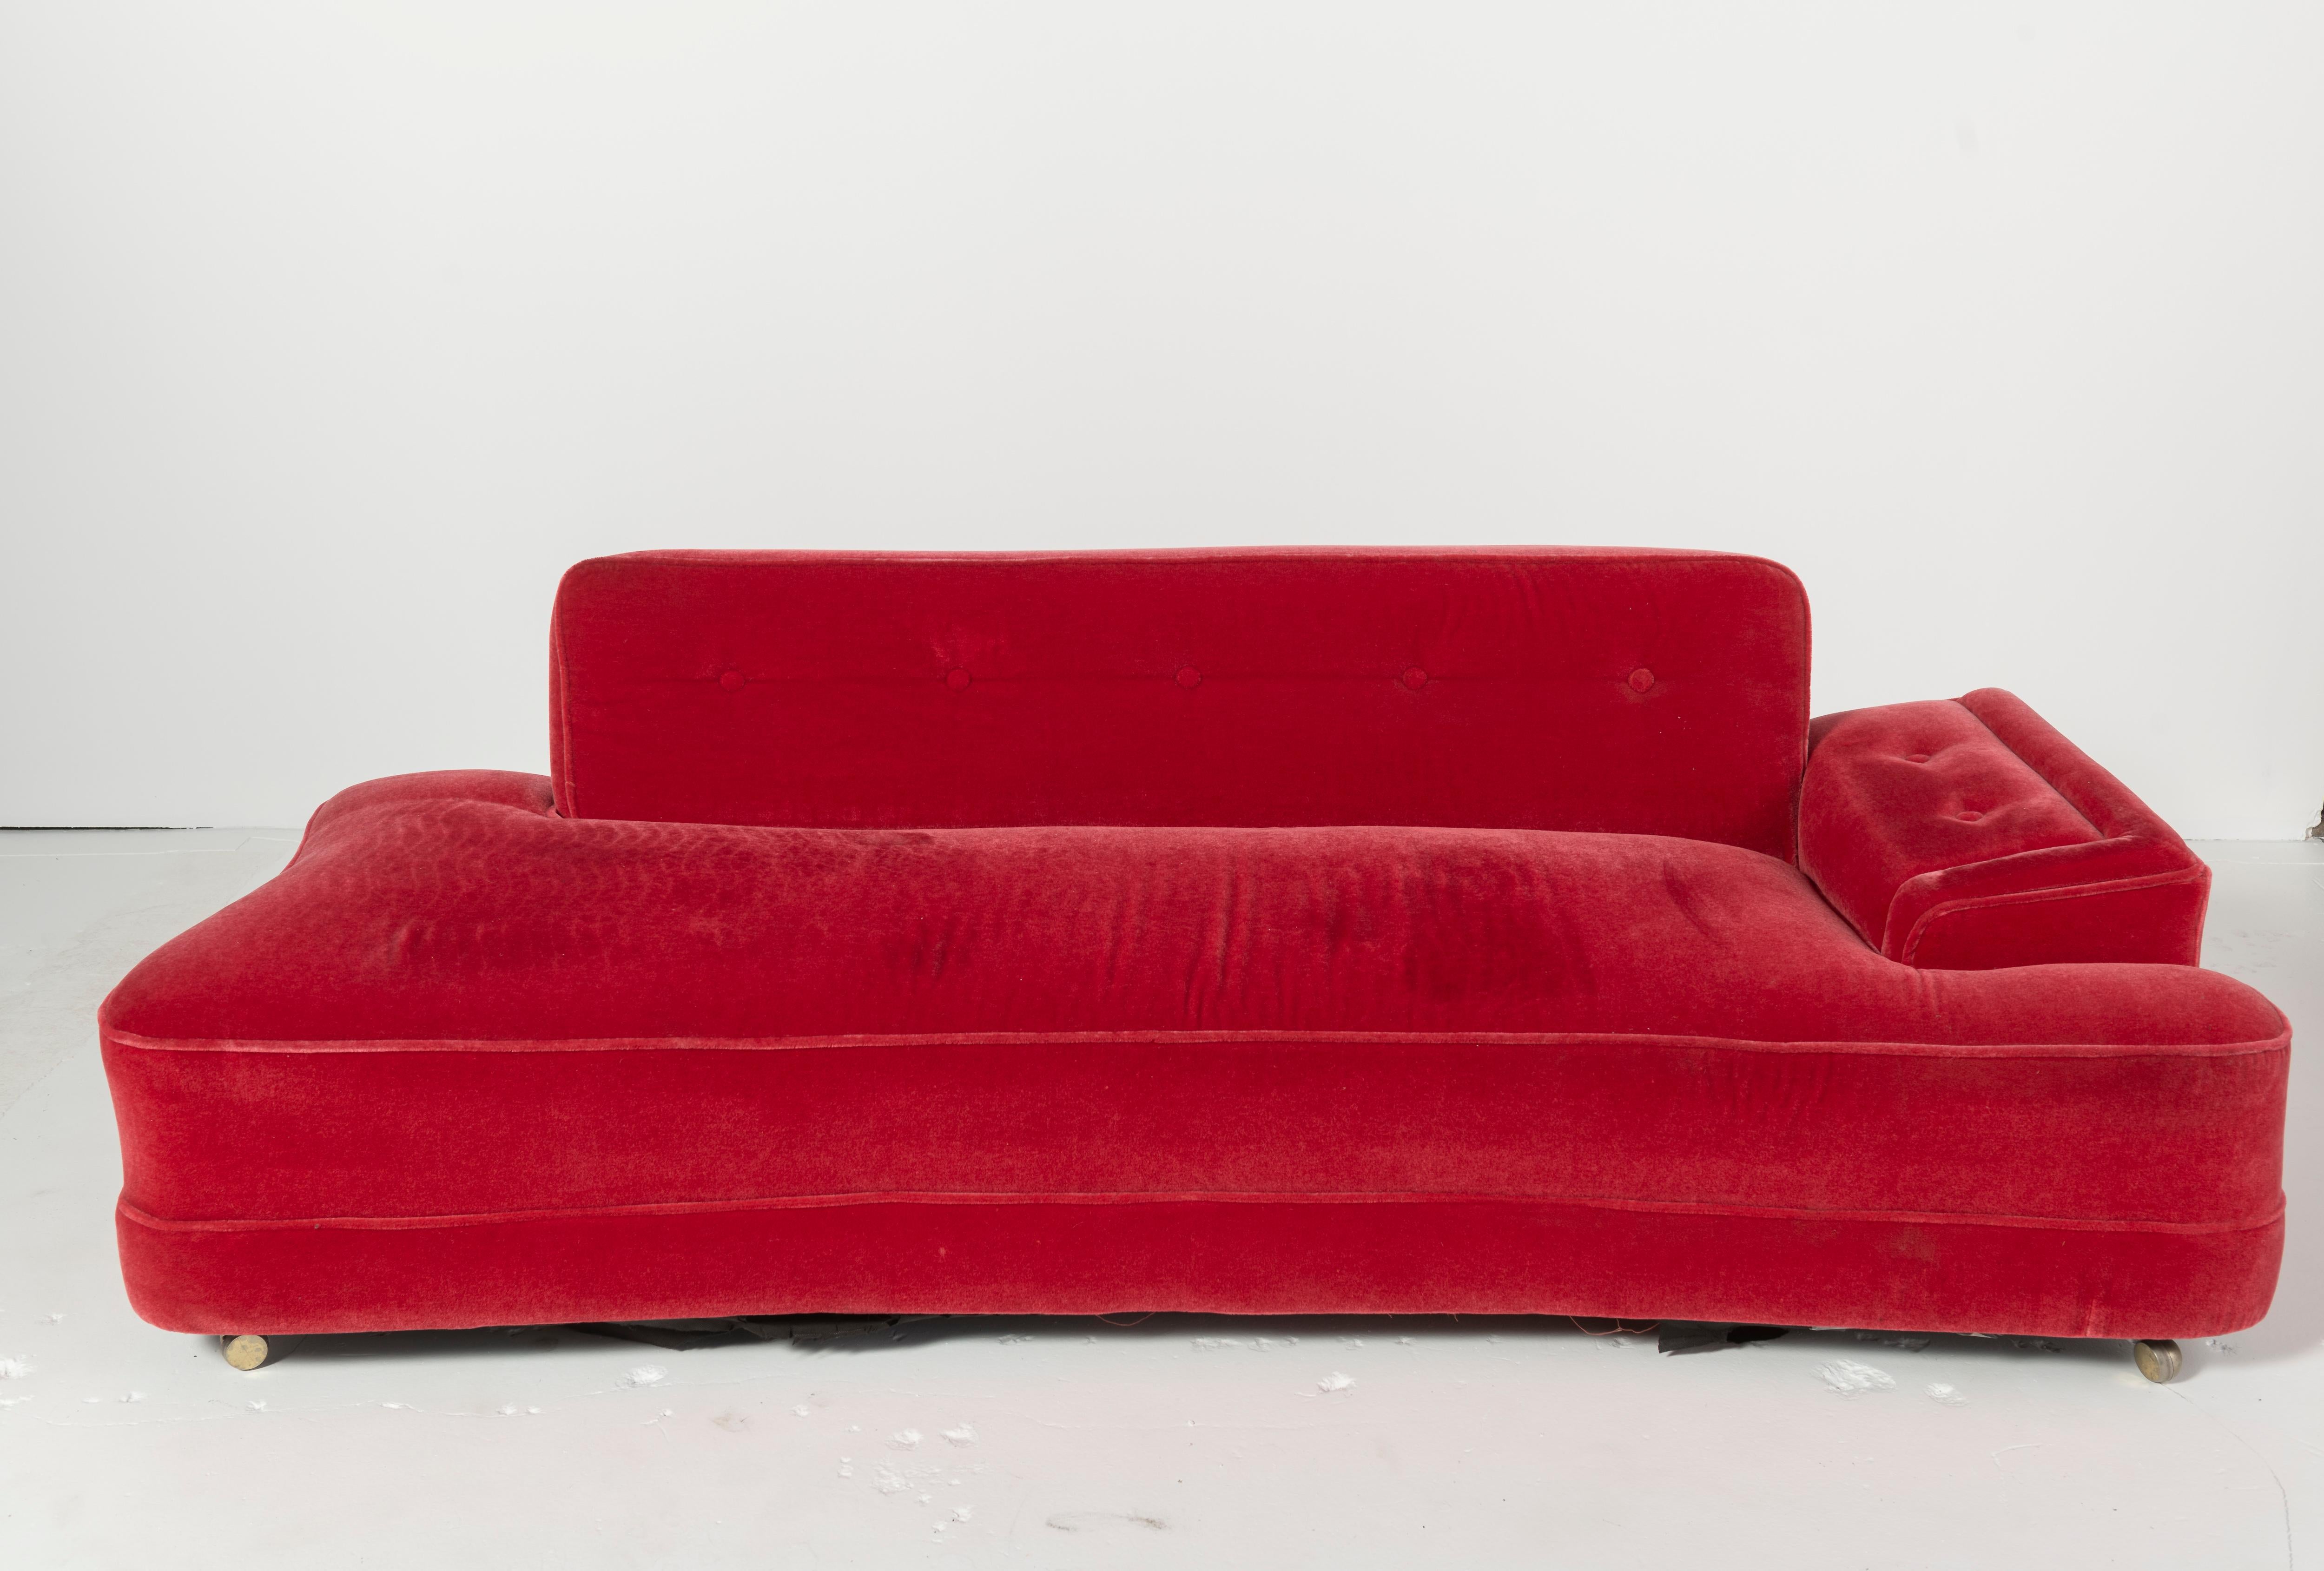 Dramatic mid-century red mohair sofa that converts to a daybed in a great size. Asymmetric with dog-bone shape, a popular style in the 1950s.